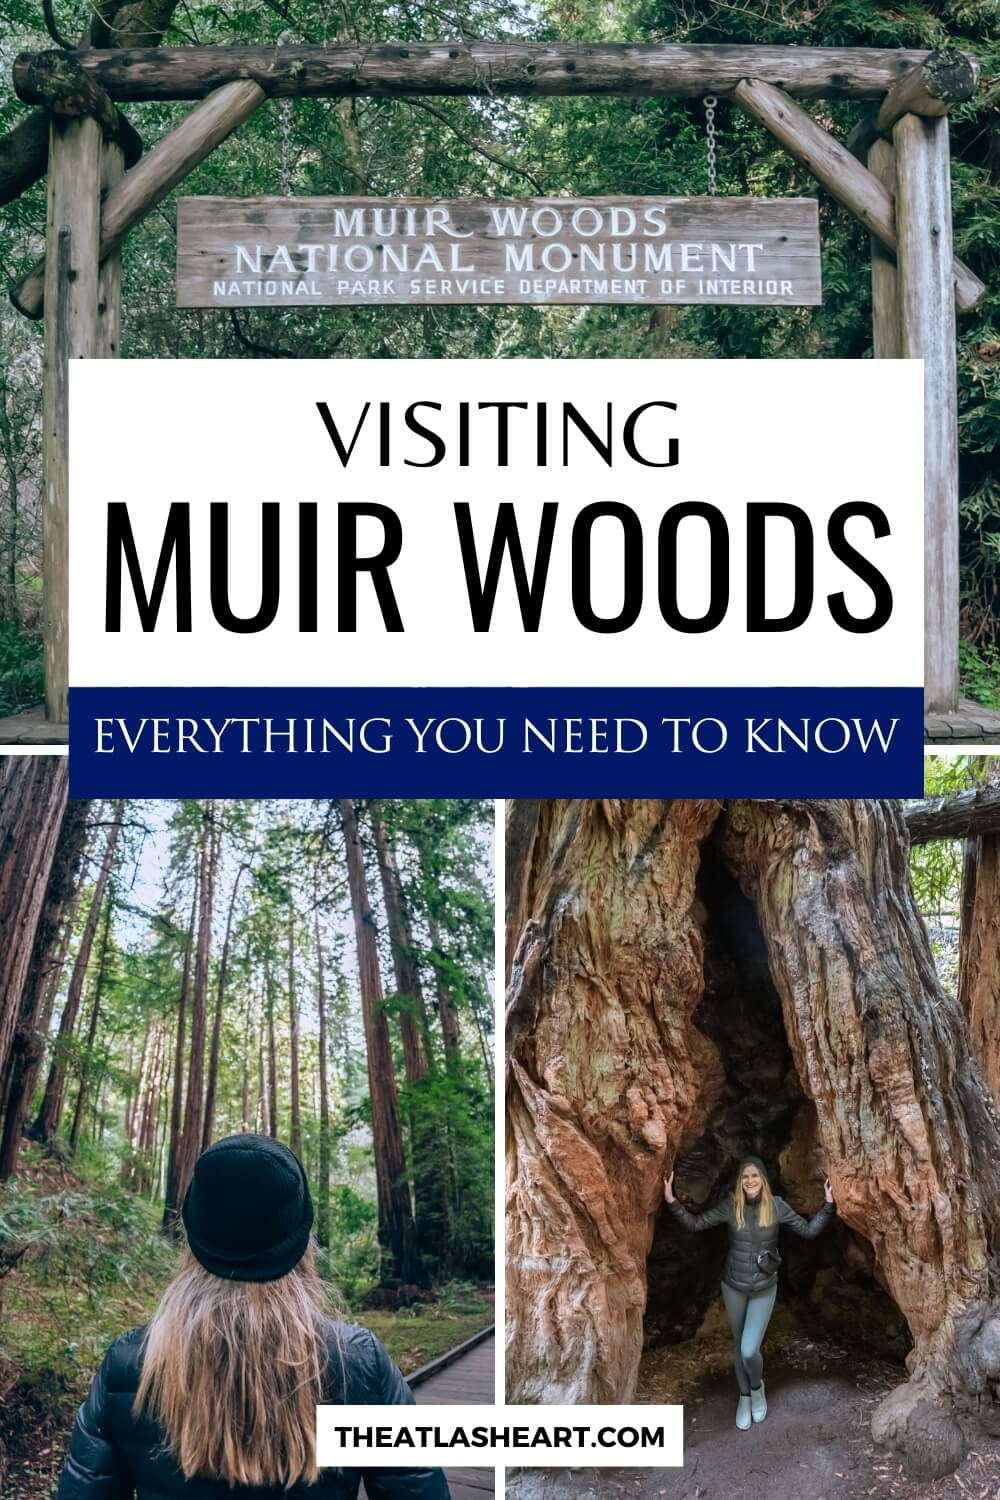 A collage of several different snapshots depicting a young woman on a hike in the redwoods, with the text overlay, "Visiting Muir Woods."